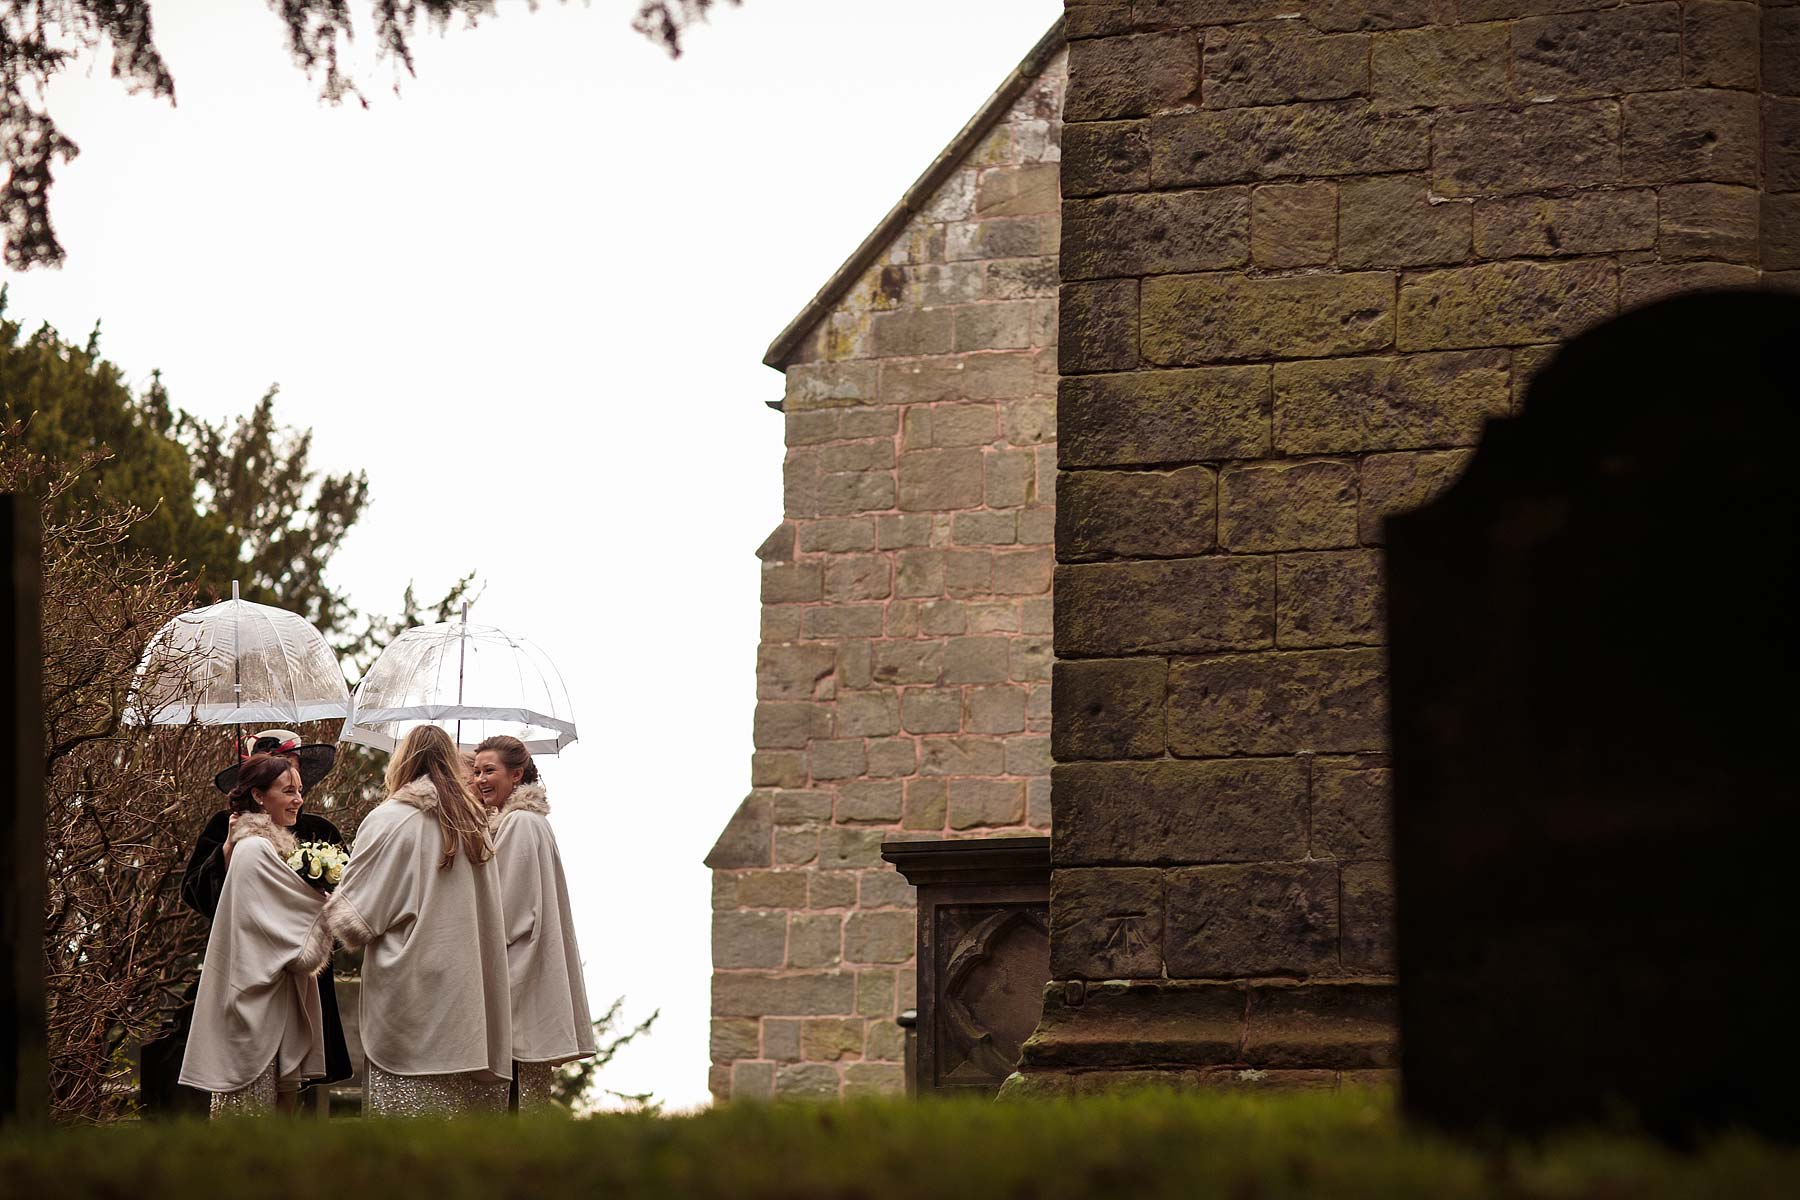 Sheltering from the rain, the bridesmaids are waiting for their bride at All Saints Church in Sandon by Stafford Recommended Wedding Photographer Stuart James